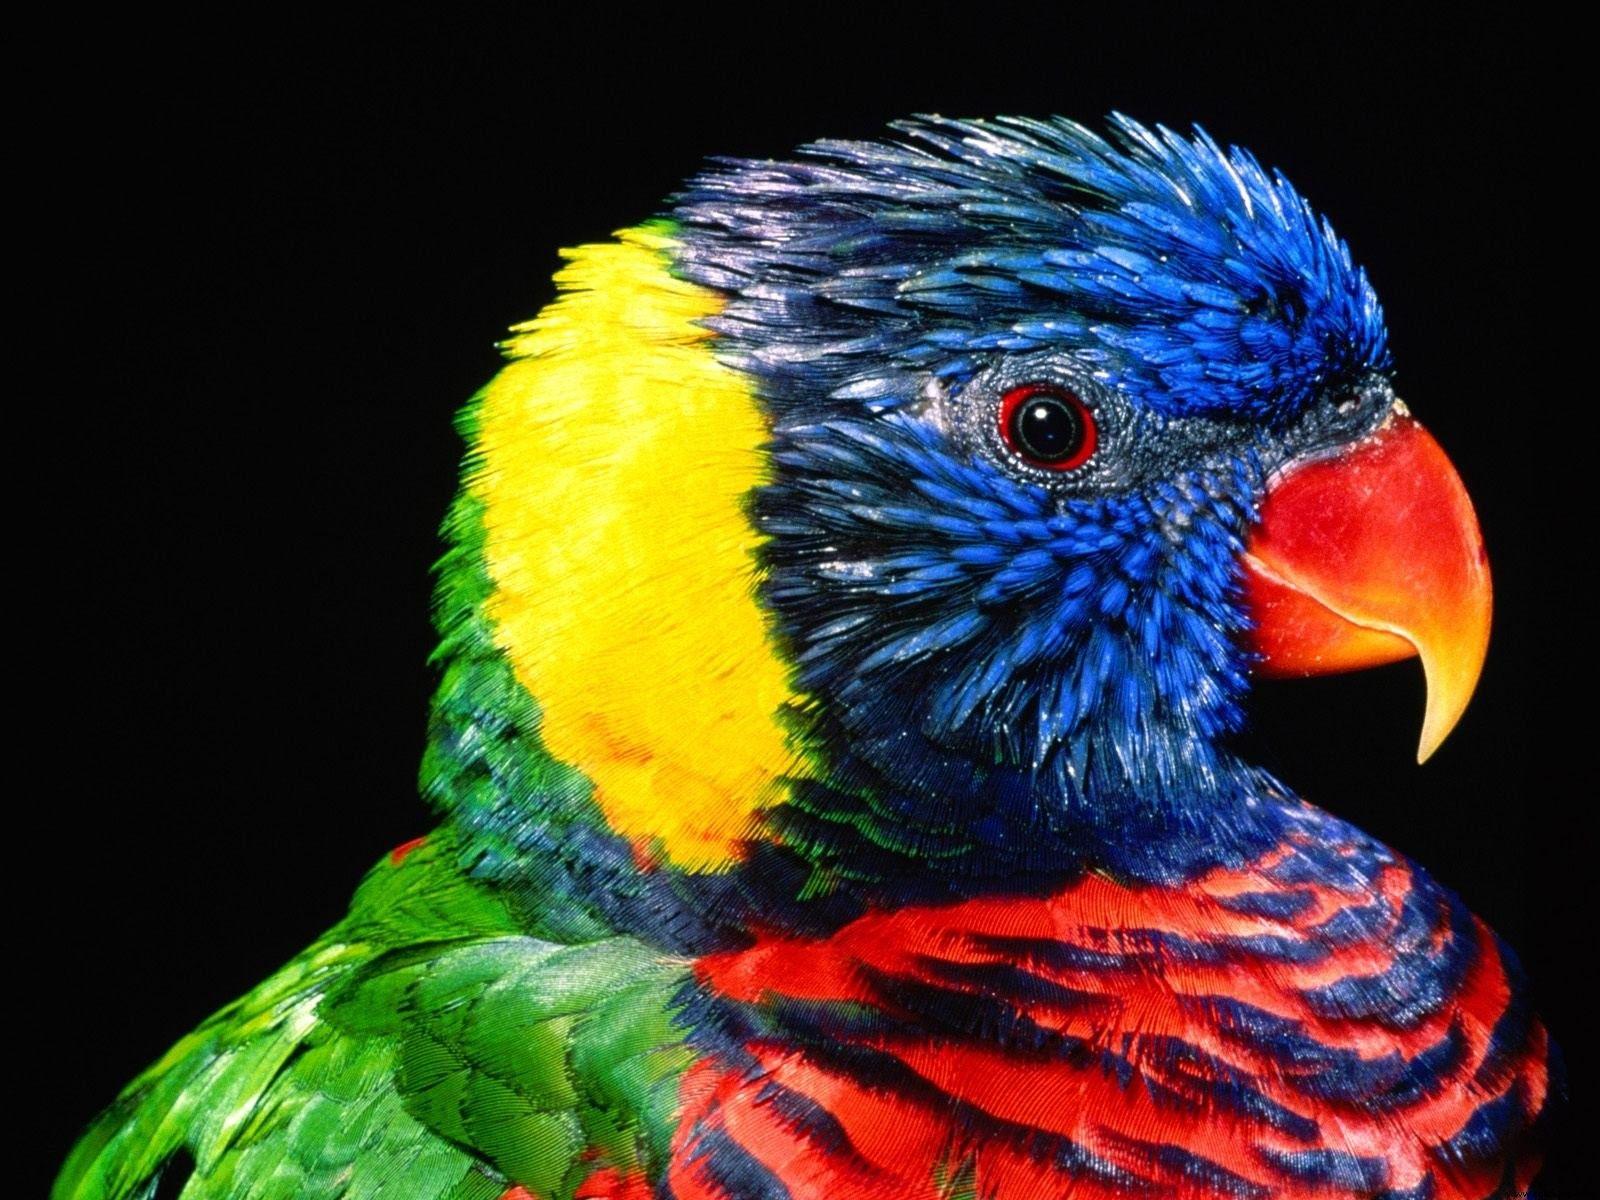 Lovely Colorful Parrots Gallery. Inspiration. Parrot wallpaper, Beautiful birds, Colorful parrots